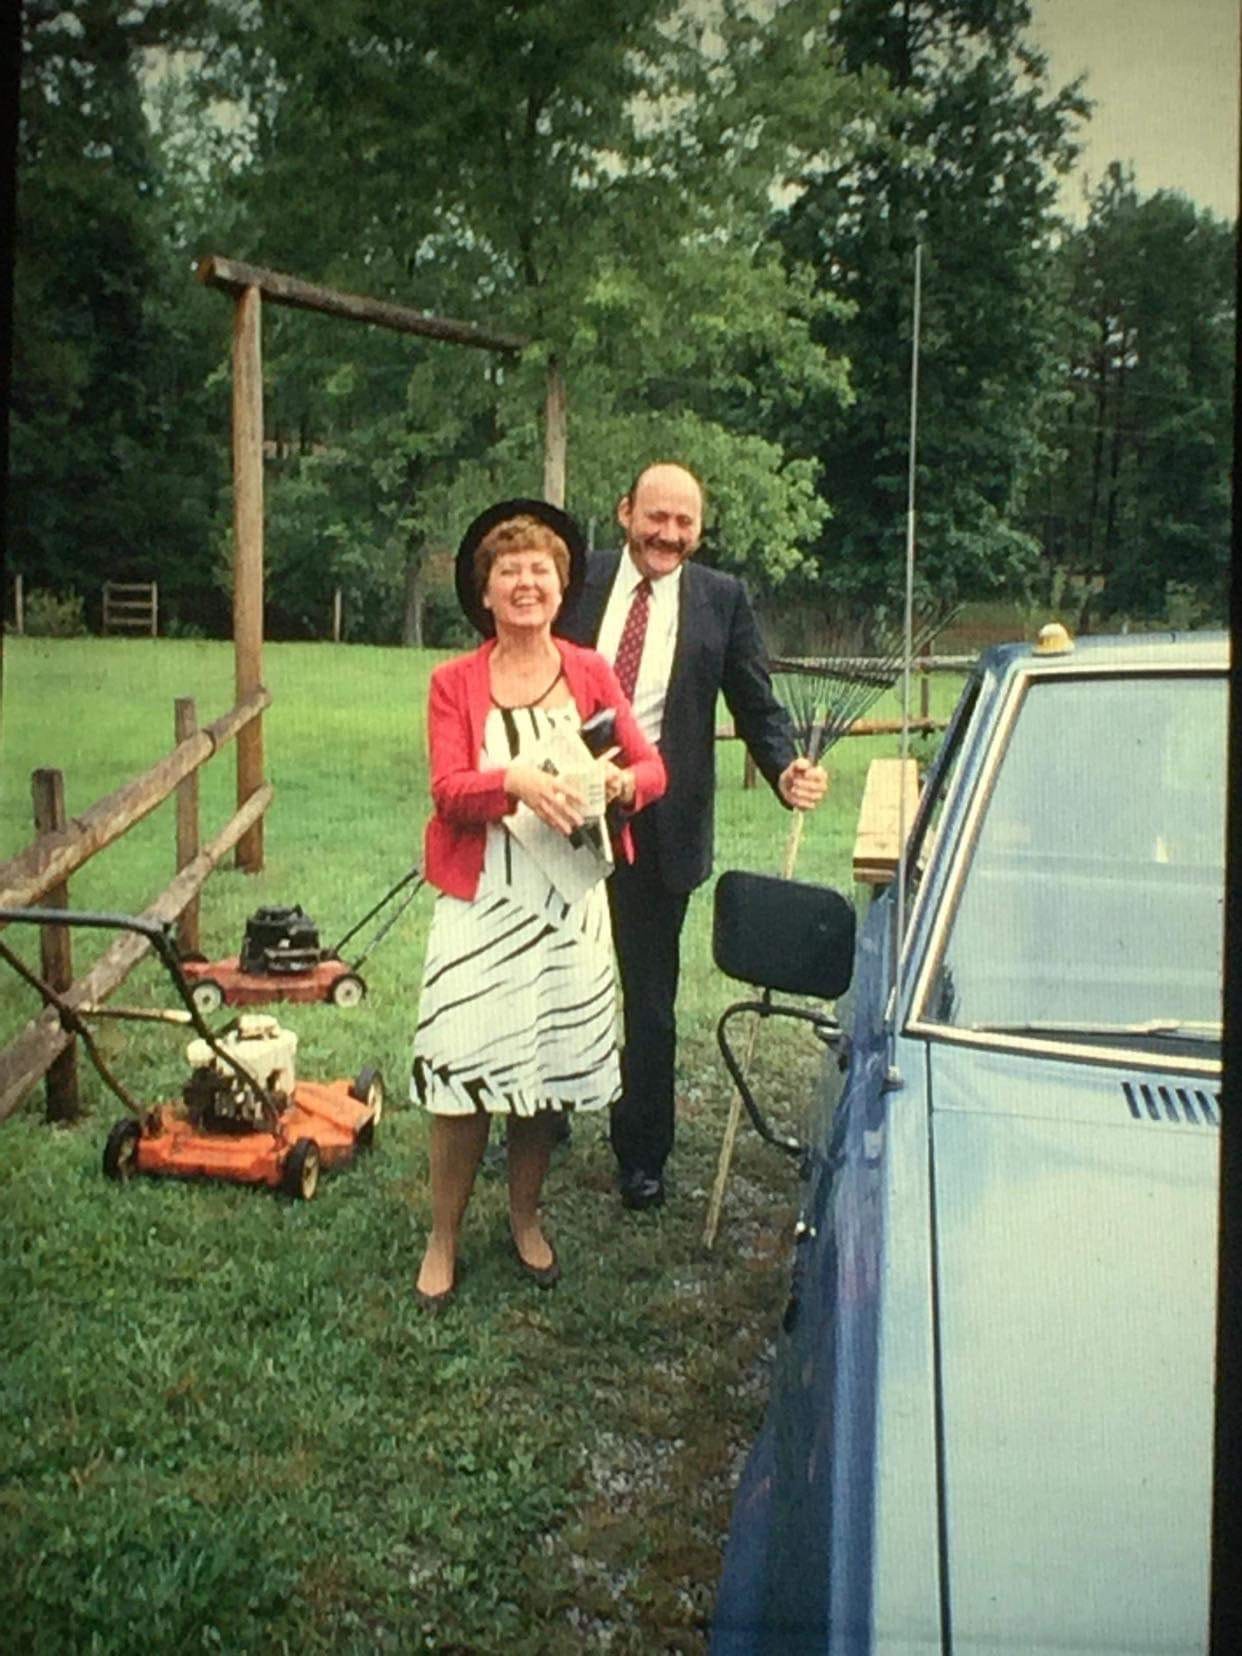 This picture was probably taken in the '80s or '90s. It's of the author's maternal grandparents and they are featured in front of a wooden post fence in an expansive property with trees, ca blue car, and two lawn mowers scattered around them. They are in the center of the photo, my grandmother wearing a black and white dress and a pink jacket and a black hate and holding a newspaper and purse while my grandfather is behind her in a suit, red tie, holding a rake upside down. They look a bit like American Gothic. They probably just got home from church.